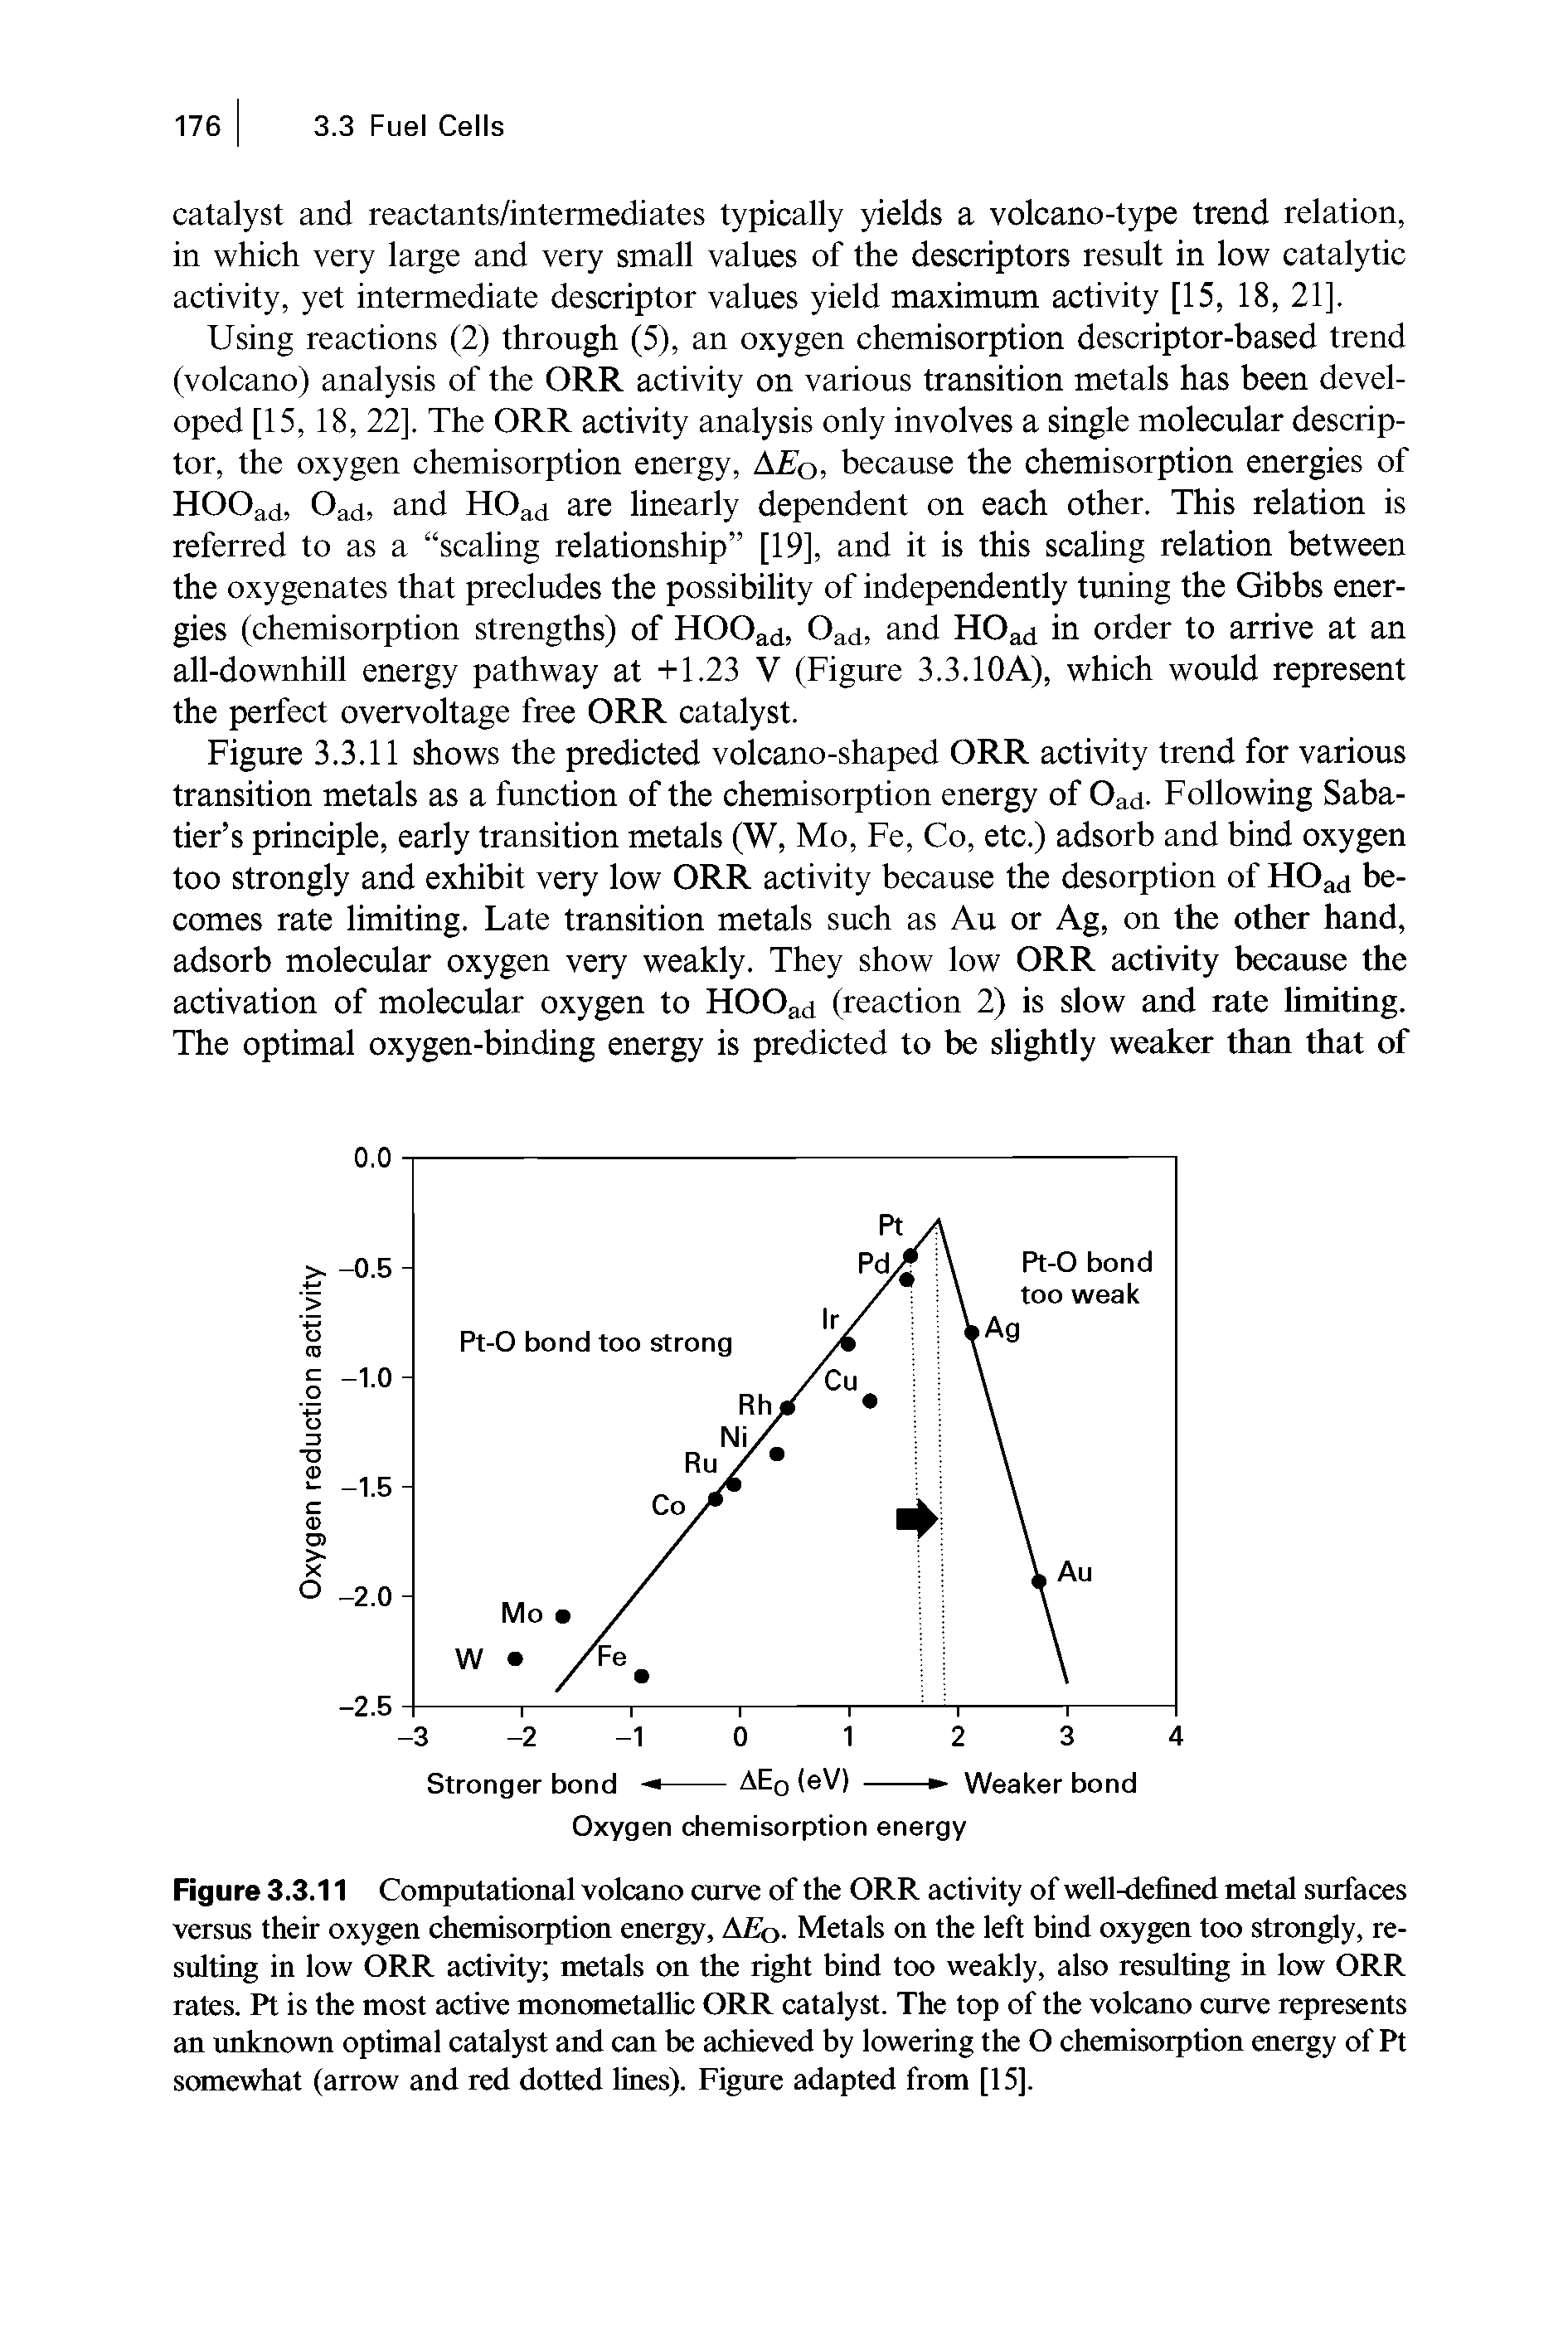 Figure 3.3.11 Computational volcano curve of the ORR activity of well-defined metal surfaces versus their oxygen chemisorption energy, A/i0. Metals on the left bind oxygen too strongly, resulting in low ORR activity metals on the right bind too weakly, also resulting in low ORR rates. Pt is the most active monometallic ORR catalyst. The top of the volcano curve represents an unknown optimal catalyst and can be achieved by lowering the O chemisorption energy of Pt somewhat (arrow and red dotted lines). Figure adapted from [15].